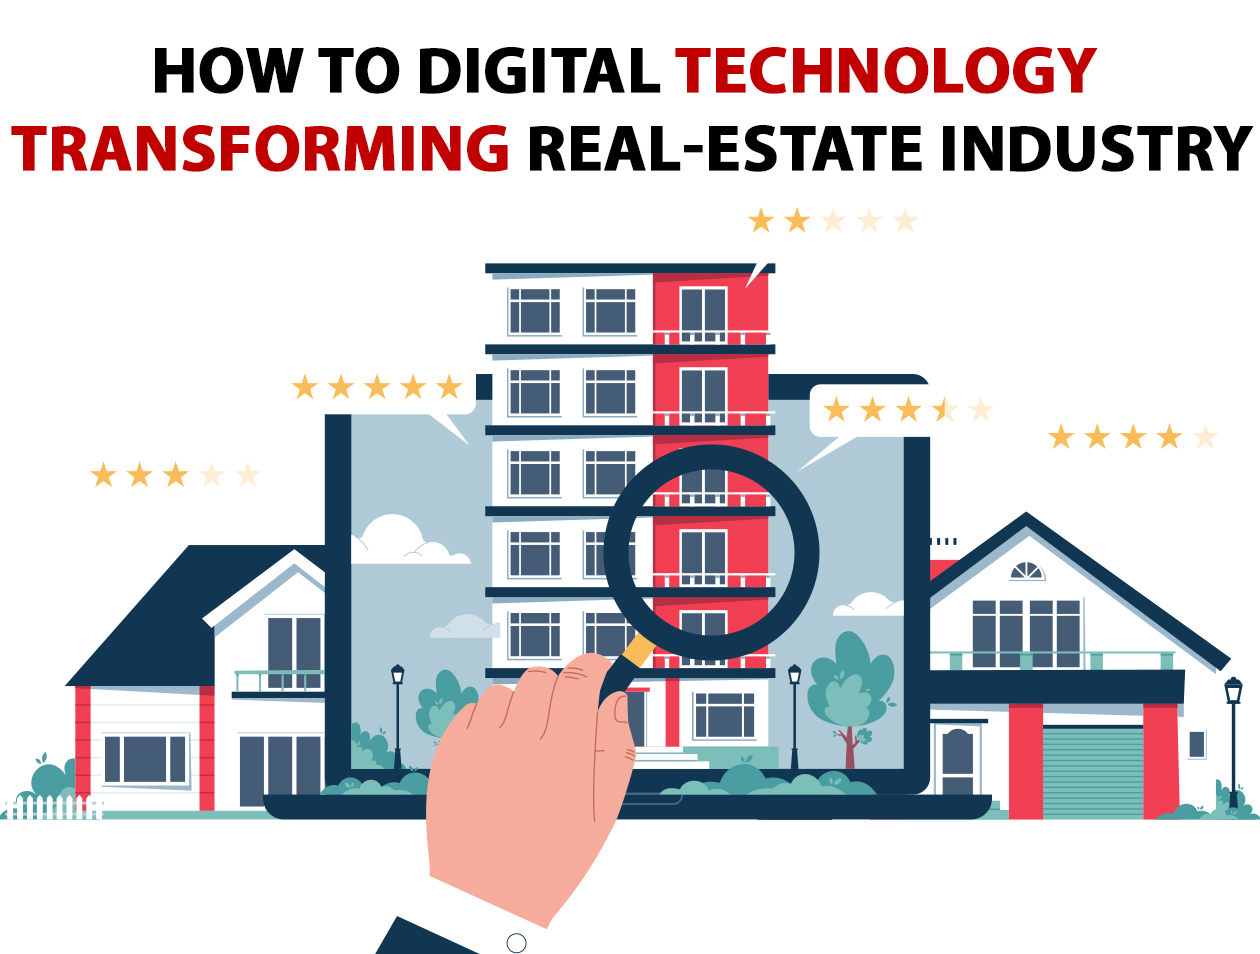 How Is Digital Technology Transforming Real-Estate Industry?